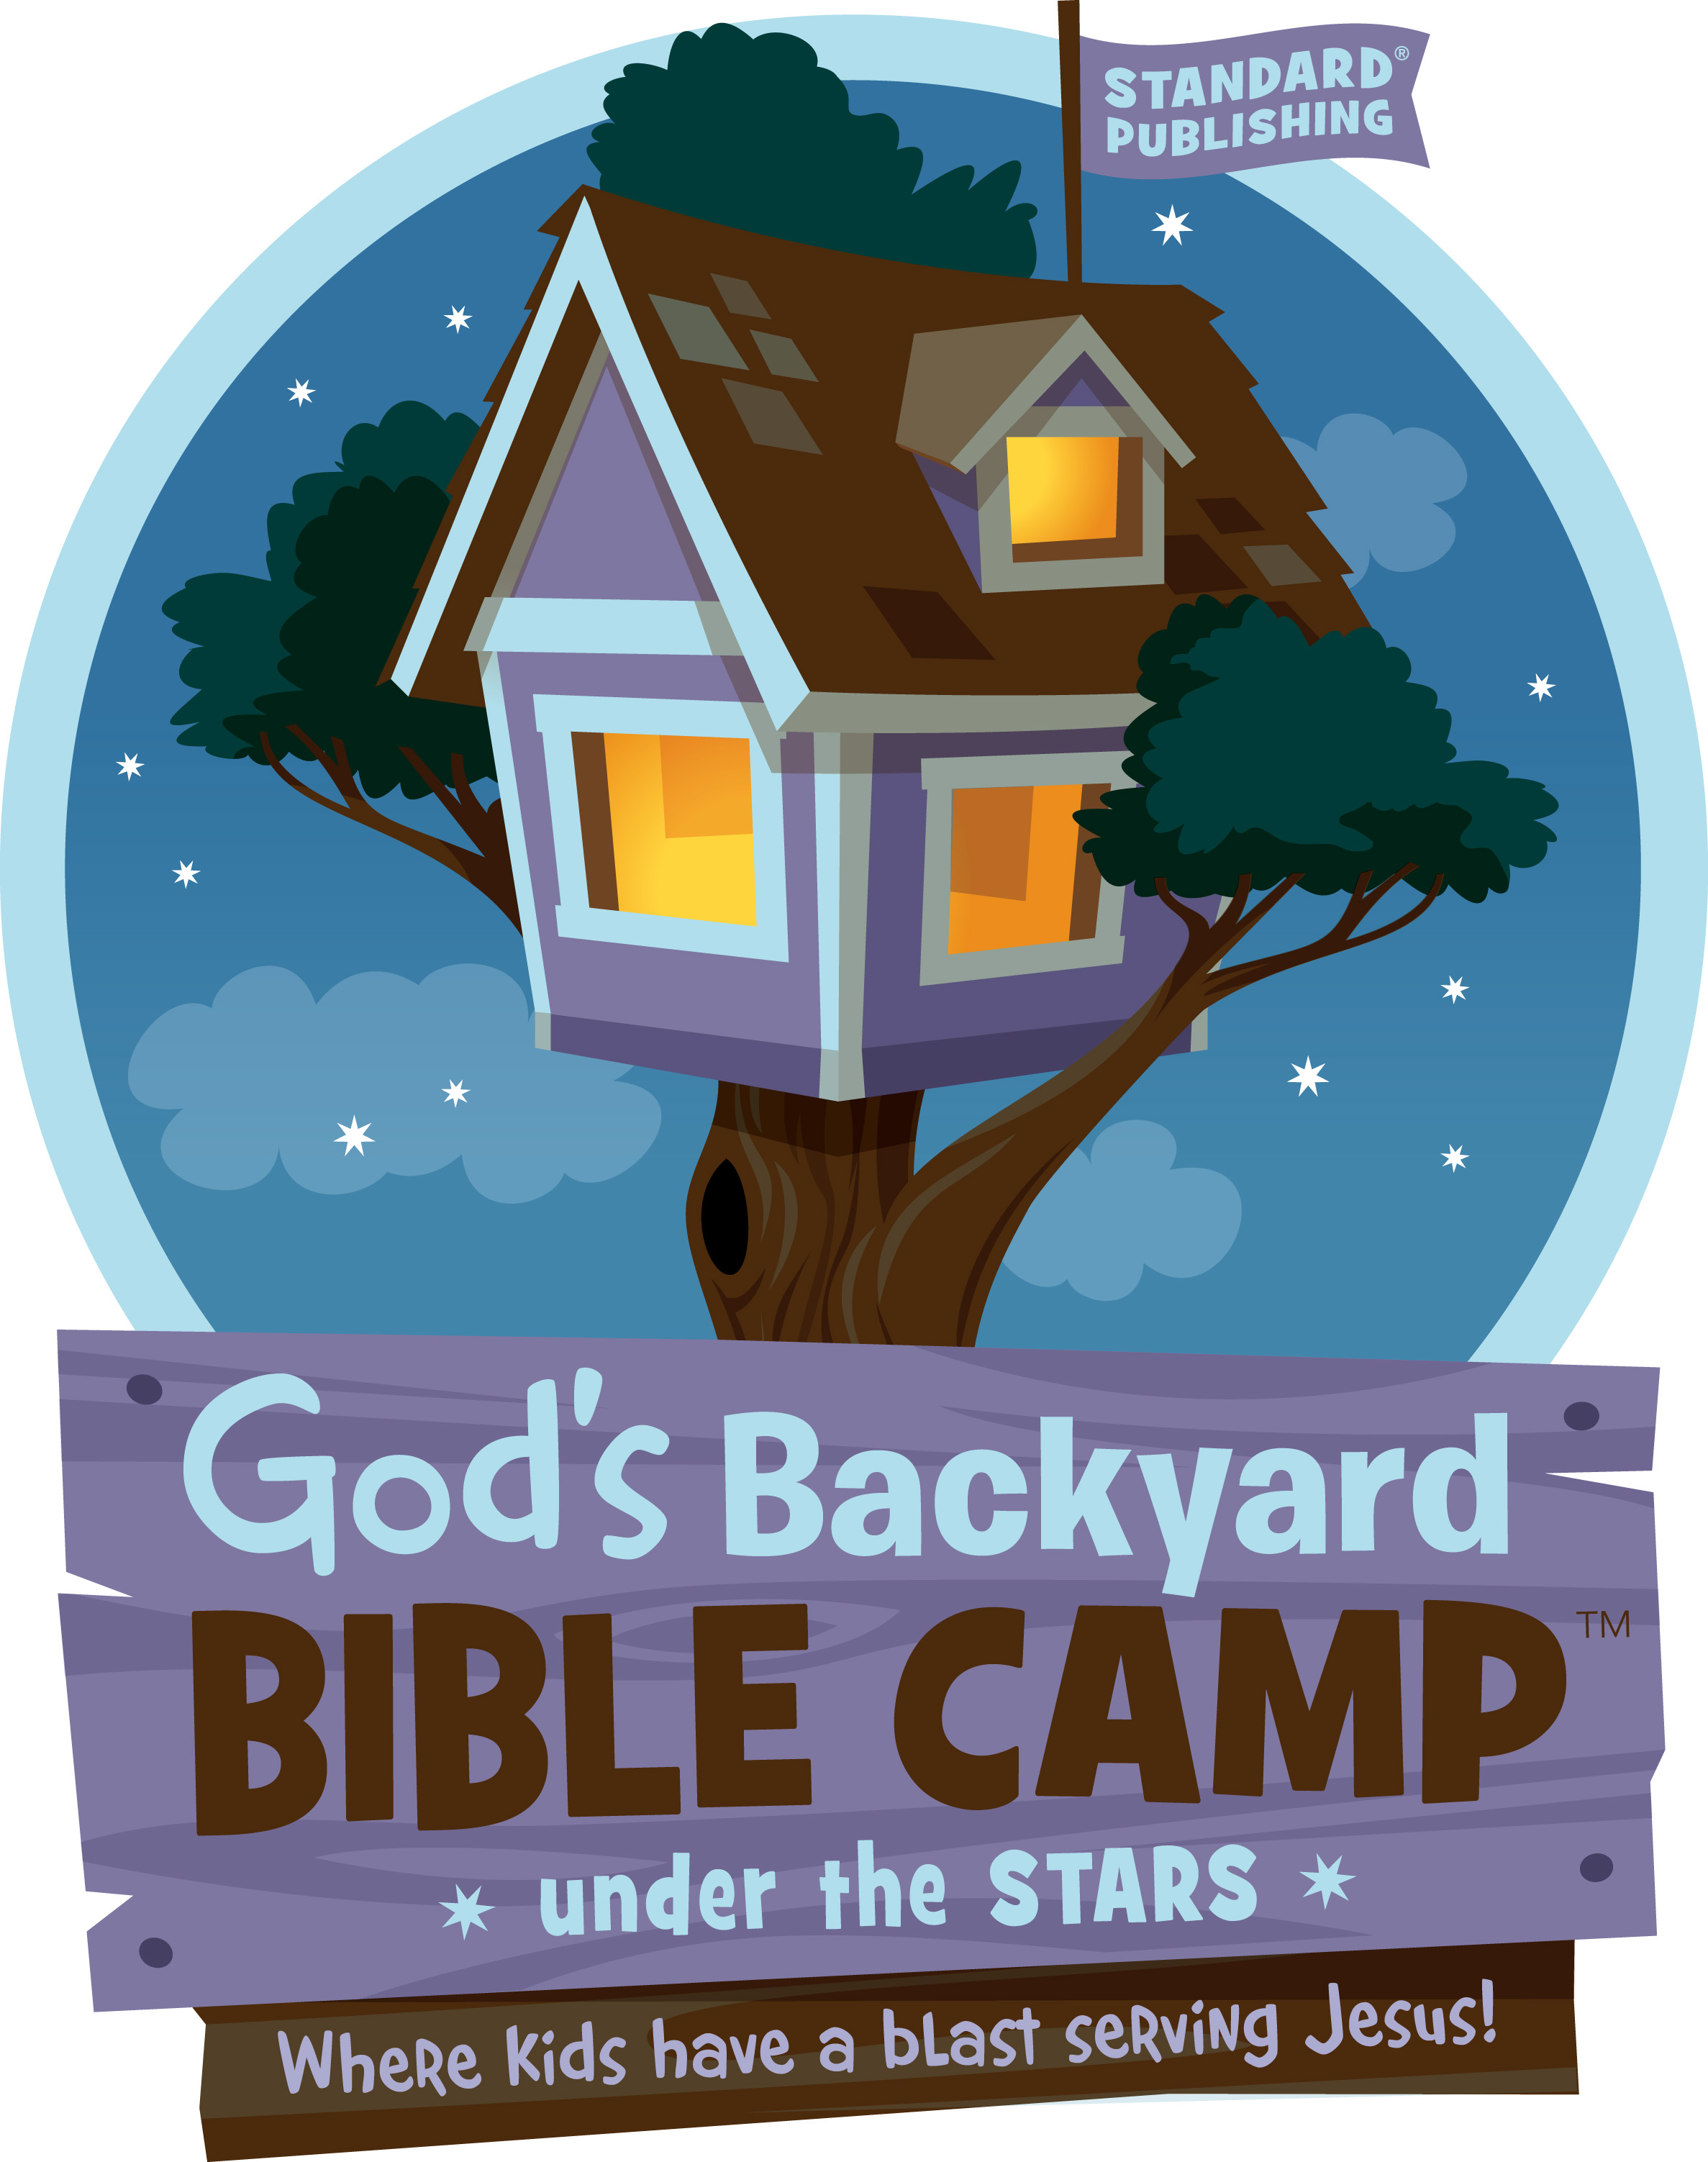 We Are Very Excited To Announce Vbs 2013  Our Theme This Year Is God